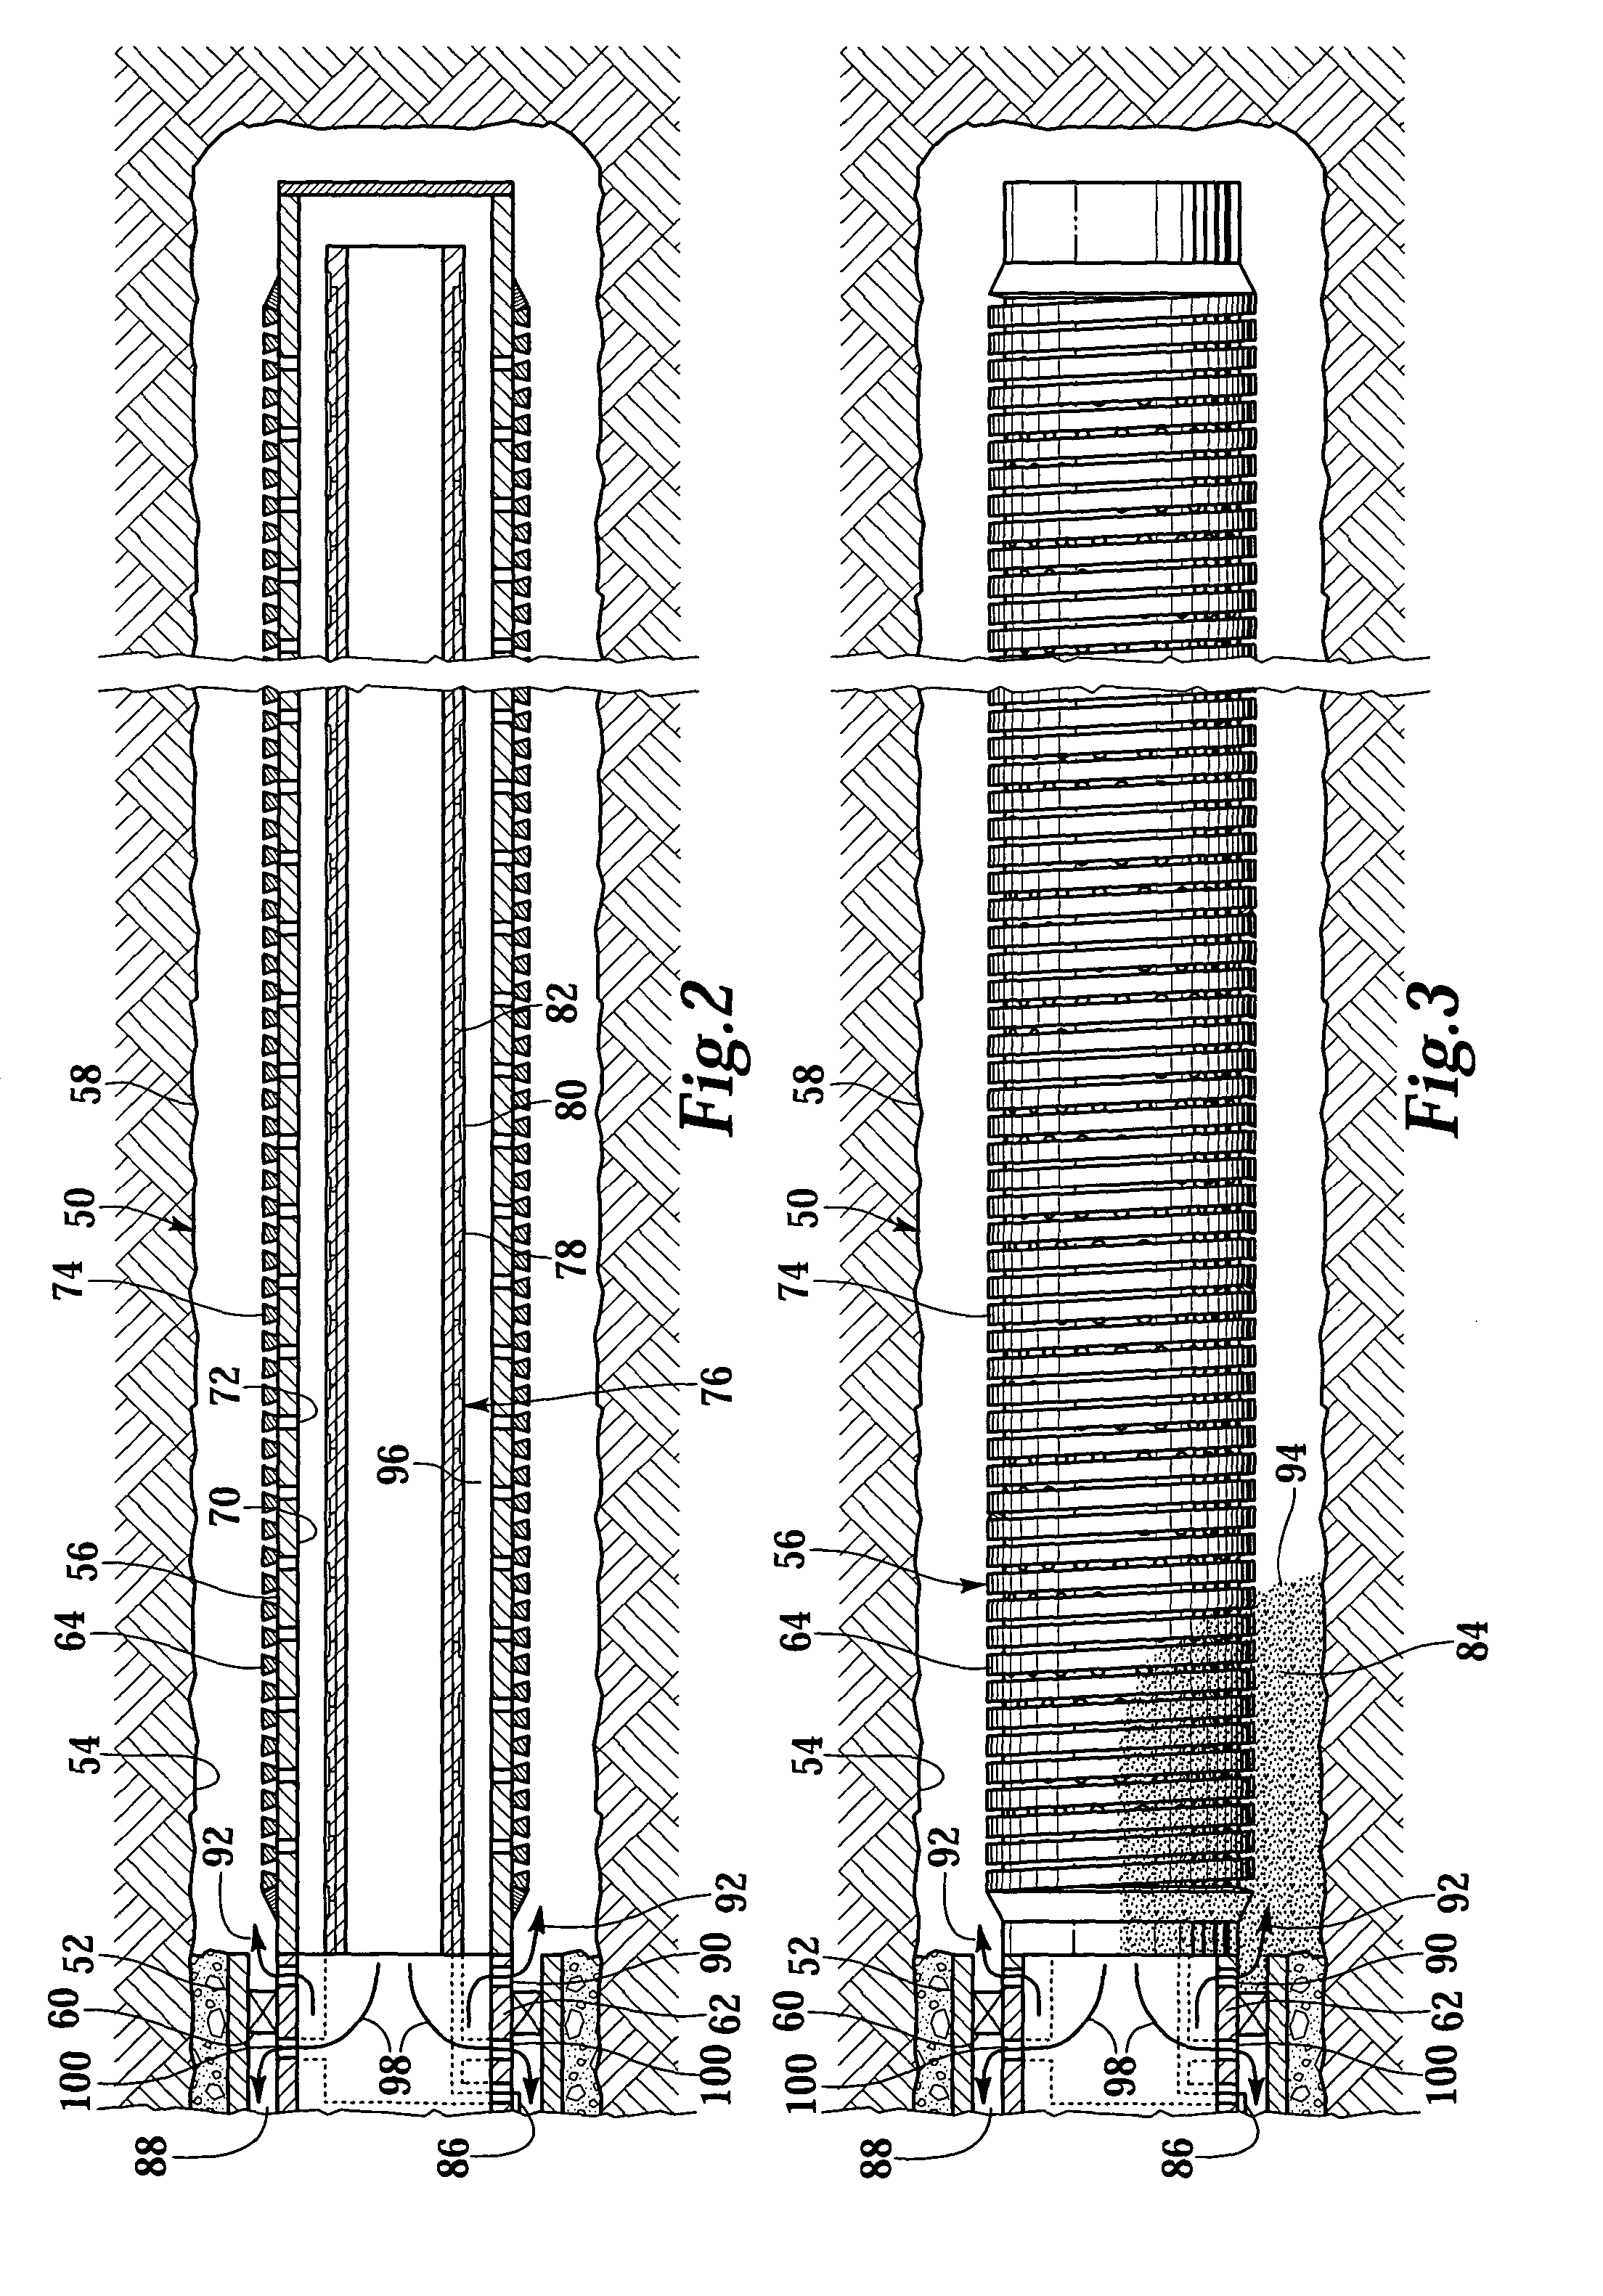 Apparatus and method for monitoring a treatment process in a production interval